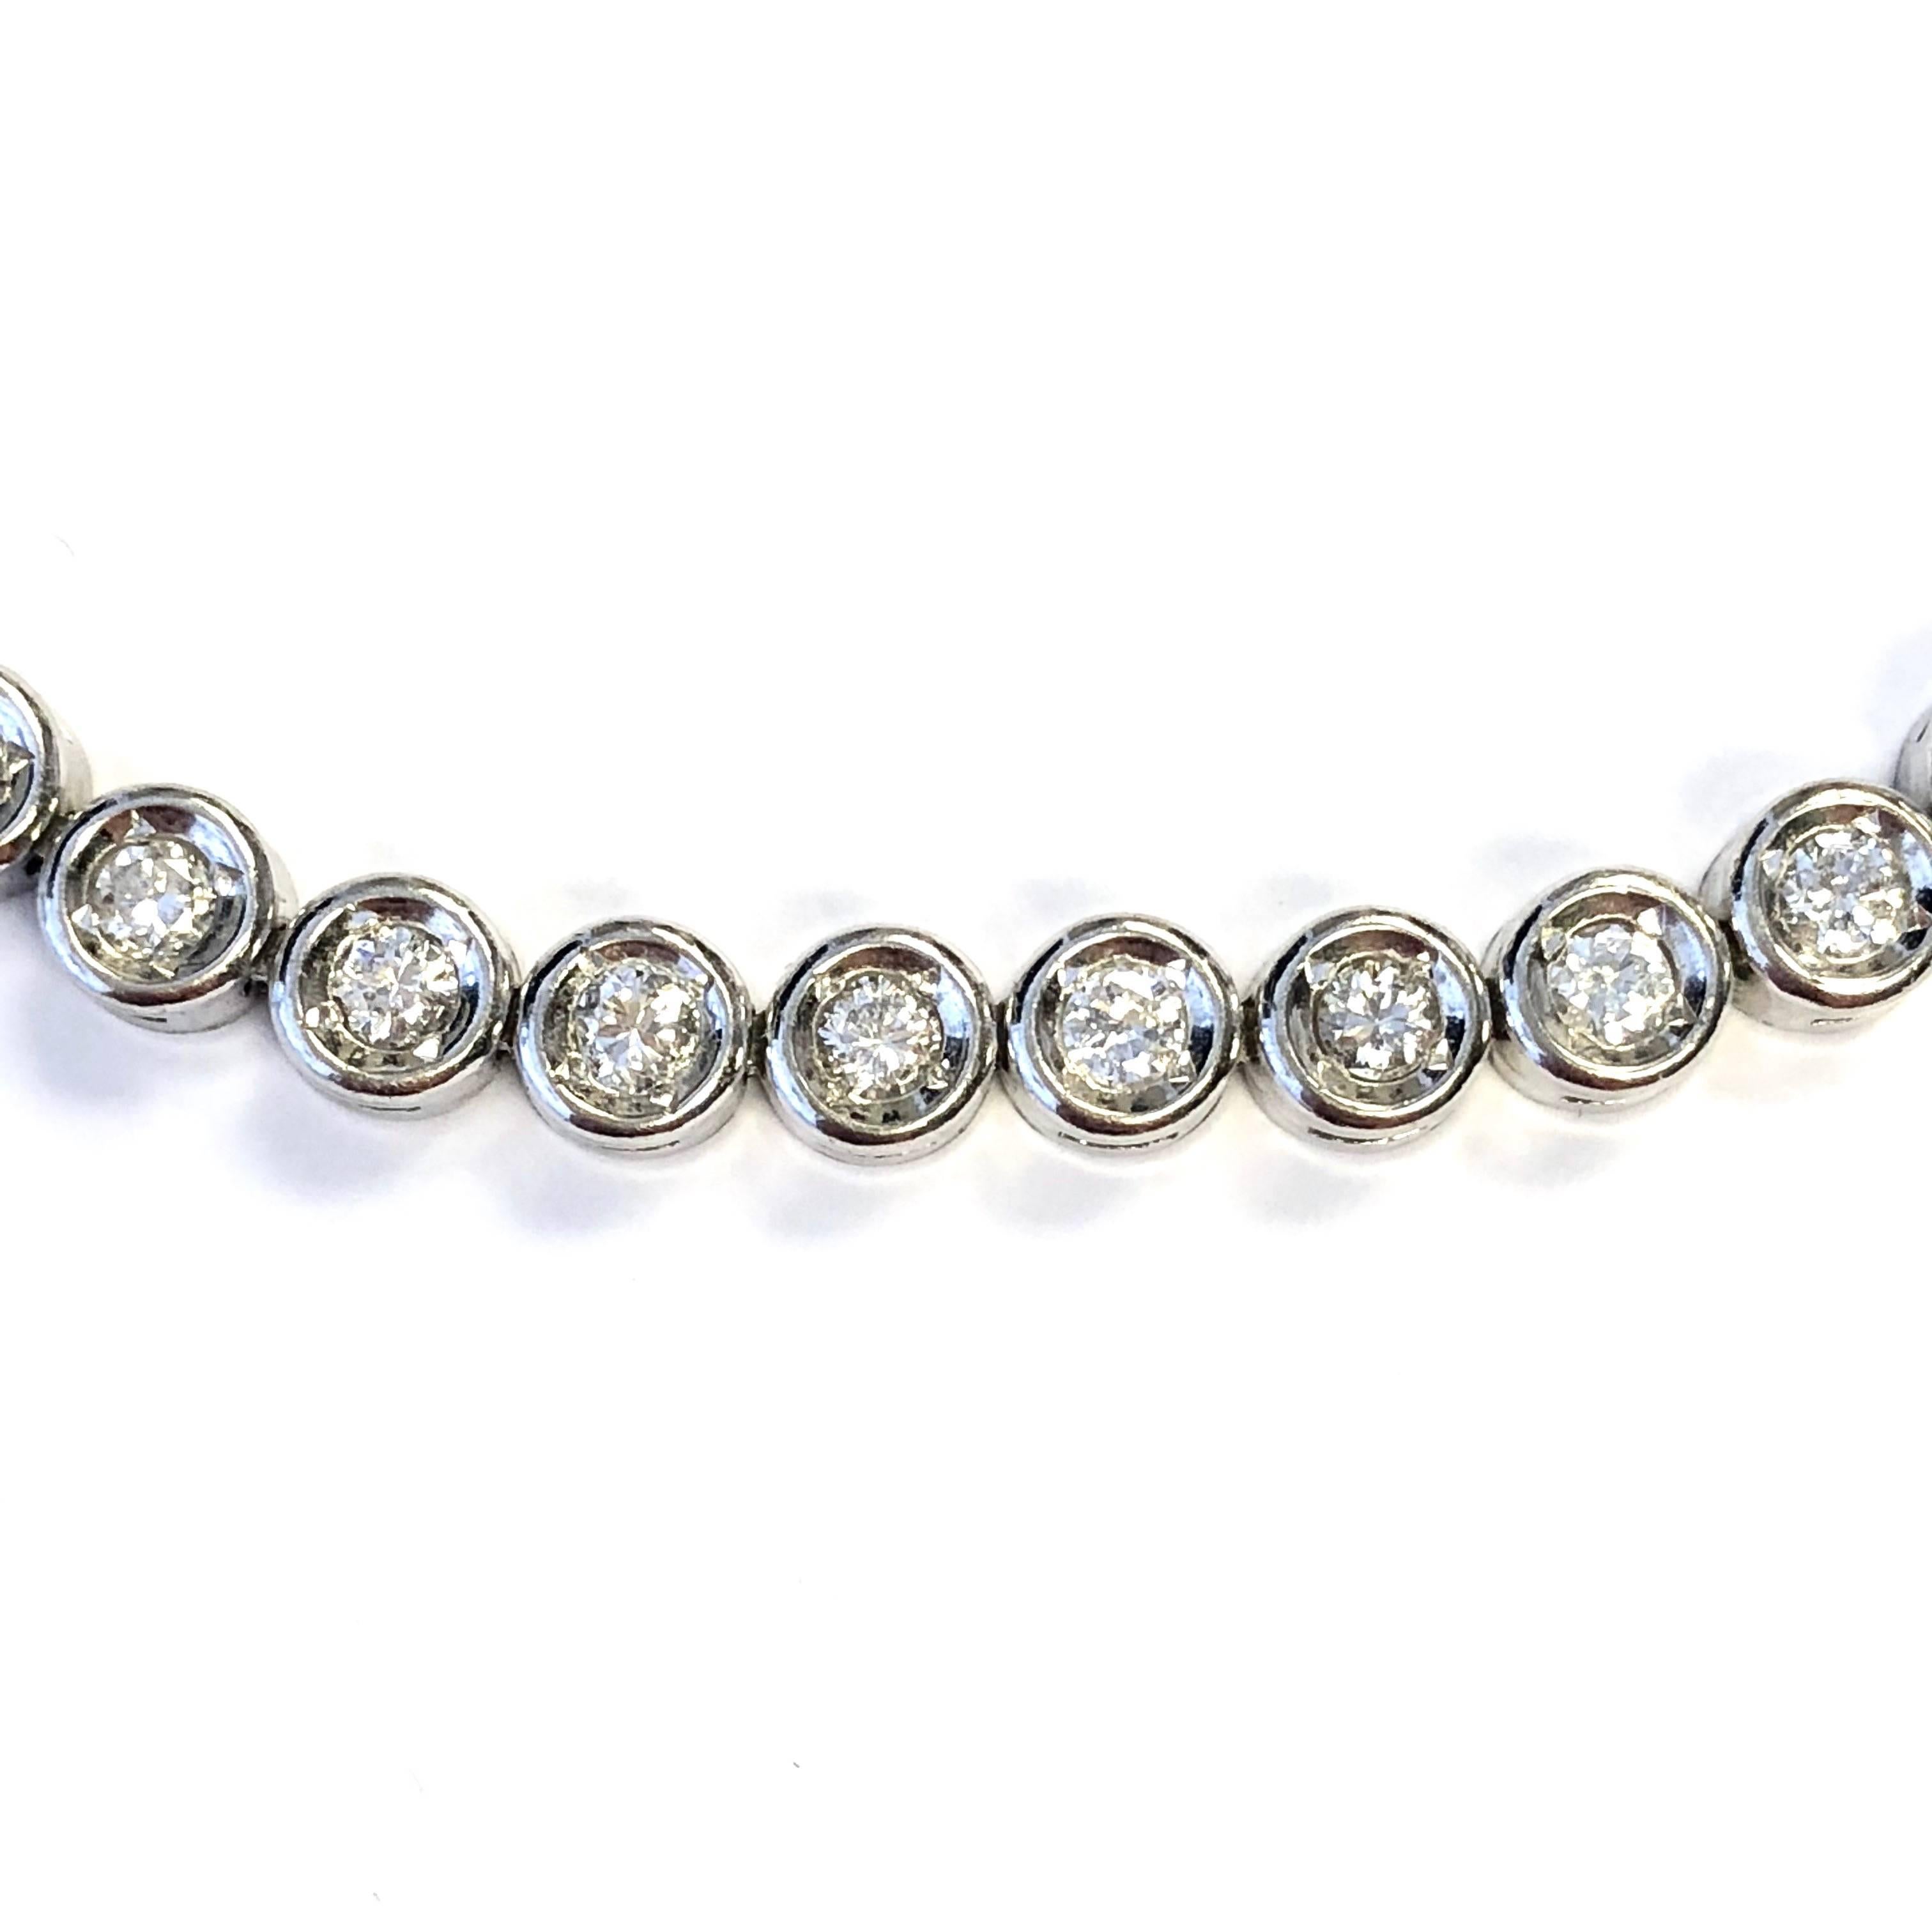 Platinum tennis bracelet, composed of 41 bezel set round brilliant cut diamonds. Total diamond weight: 2.01 ct (Stamped) Color: G-H, Clarity: VS2-SI2
Length: 7.5 inches
Weight: 18.9 grams